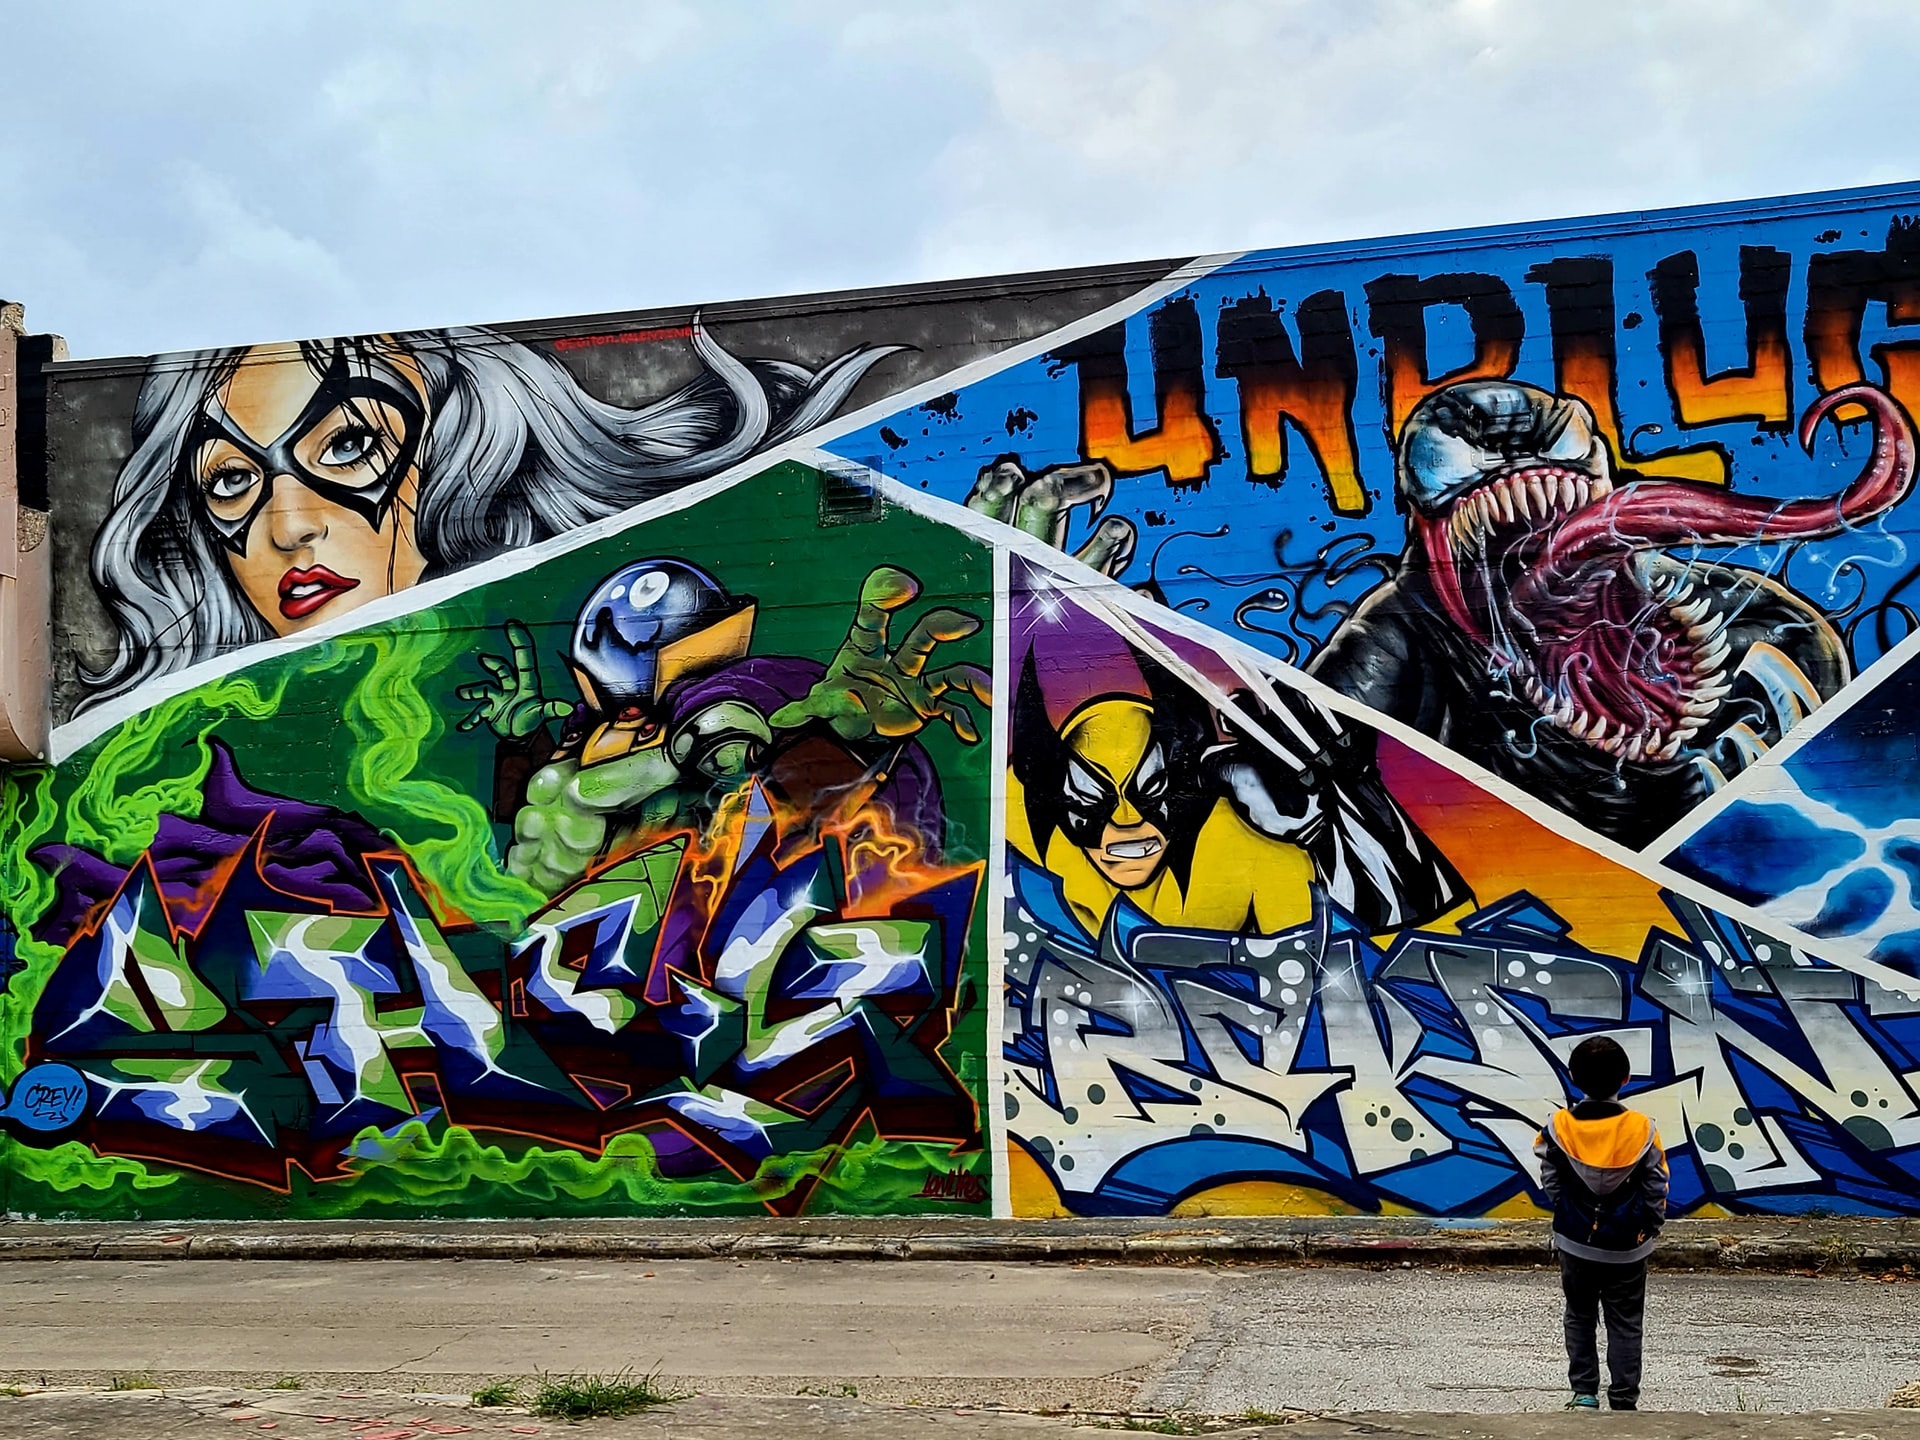 MARVEL graffitti with Heroes